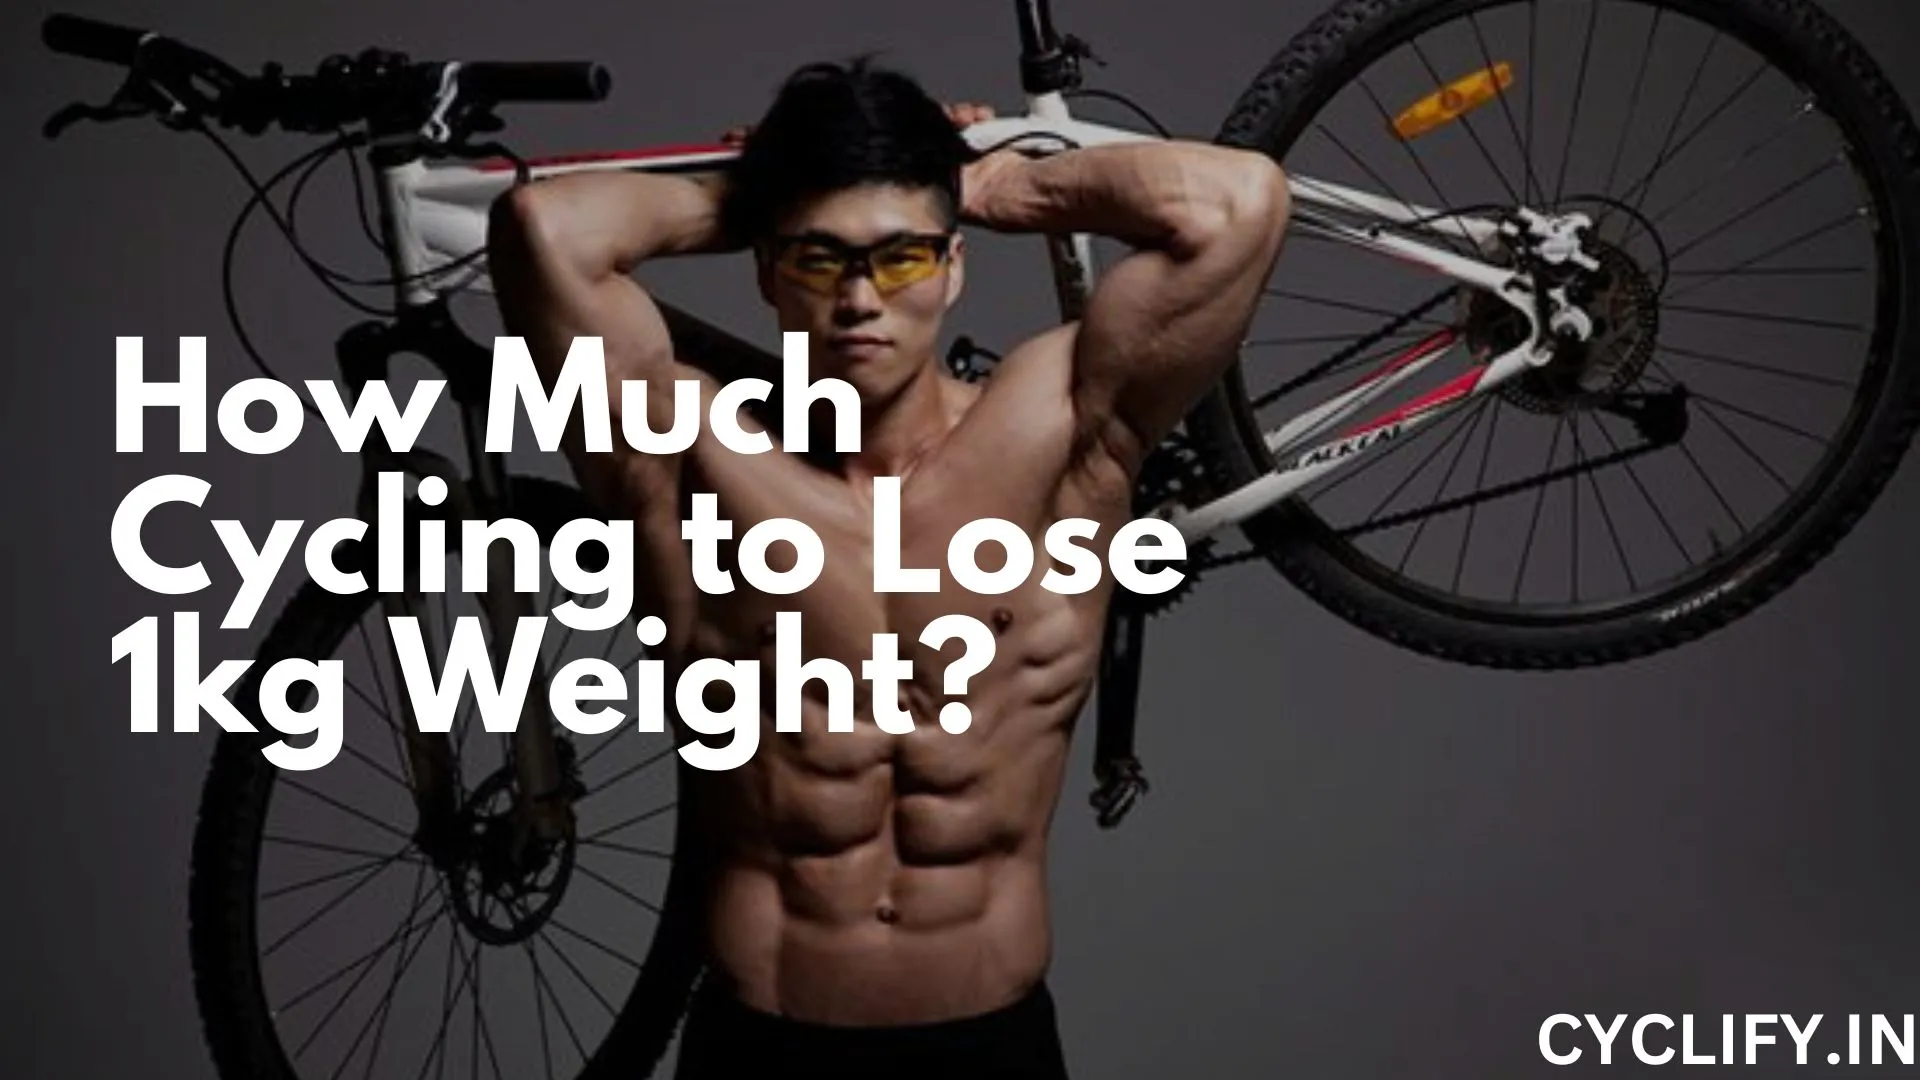 How Much Cycling to Lose 1kg Weight